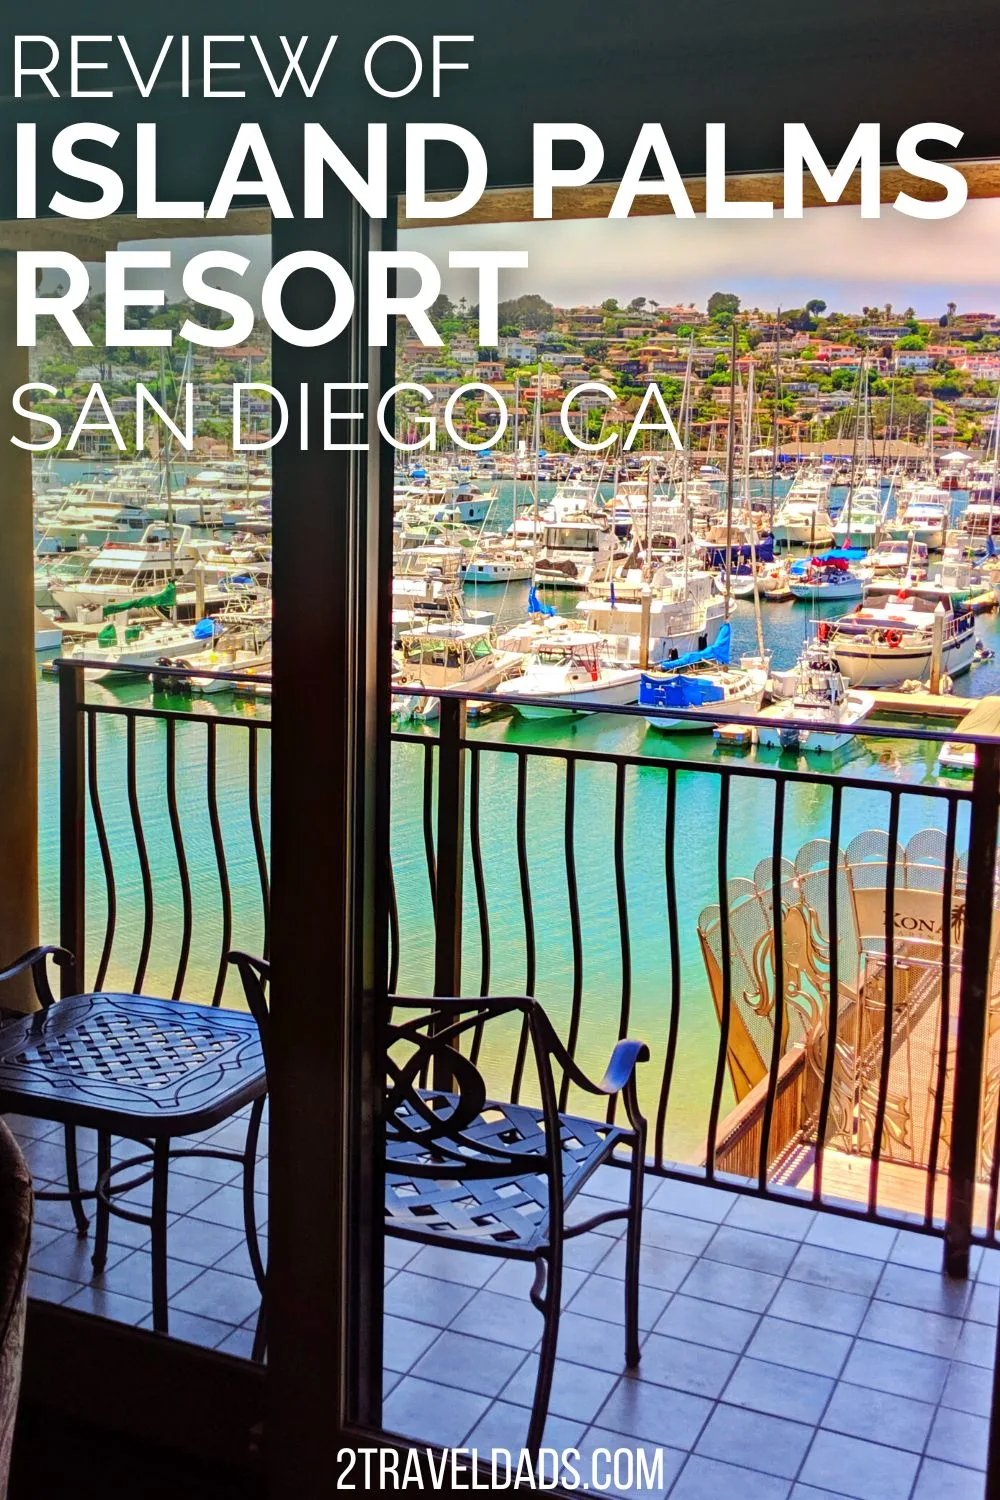 The Best Western Plus Island Palms Resort Hotel in San Diego is ideal for families. Centrally located, great pools, and delicious restaurant, it's a perfect San Diego hotel.